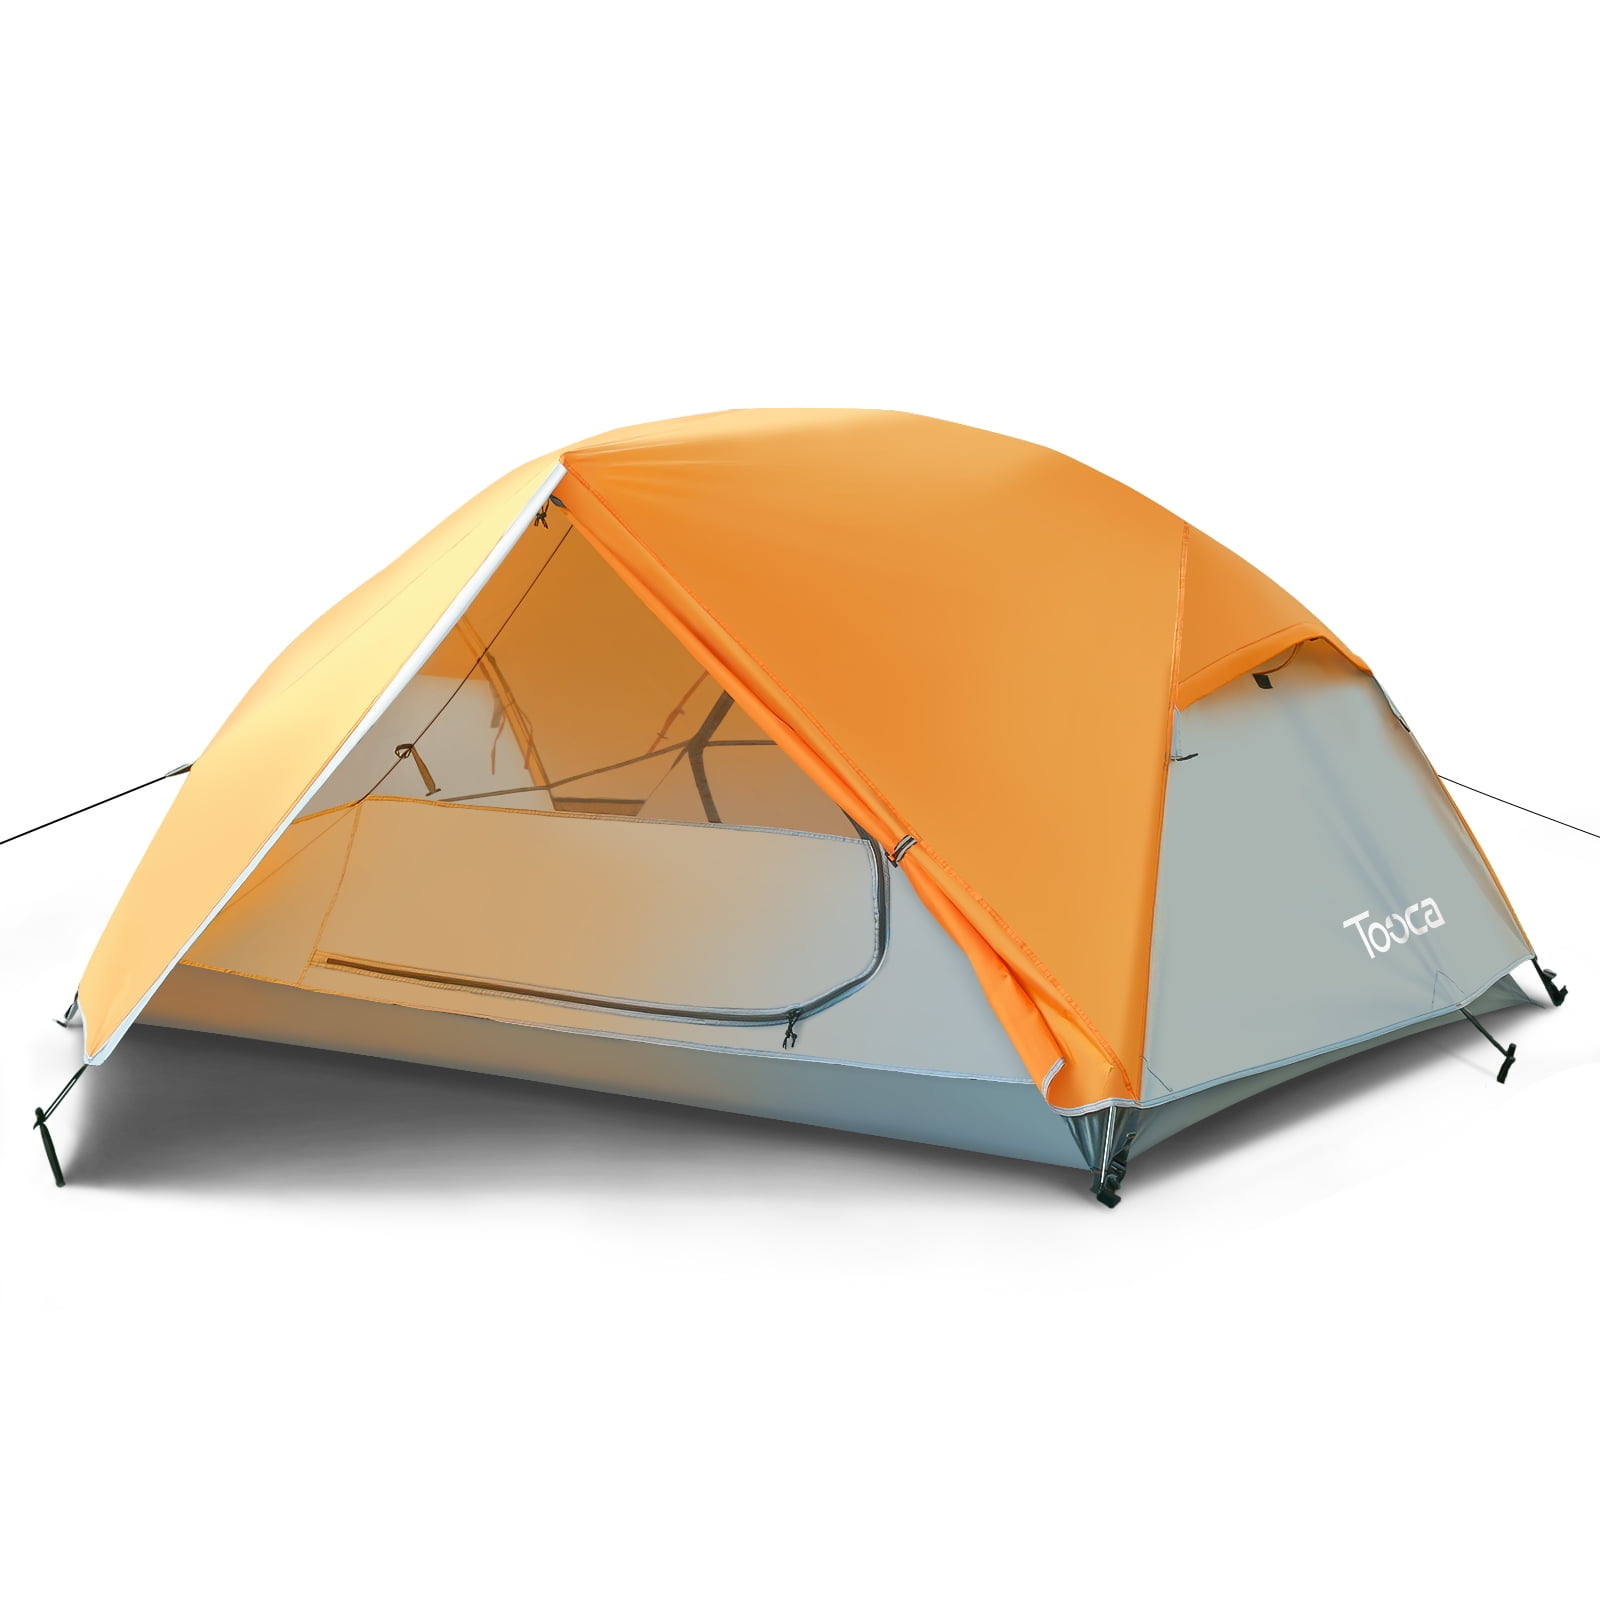 NEW Orange Ozark Trail 2 Person Hiker Backpacker Camping Tent 